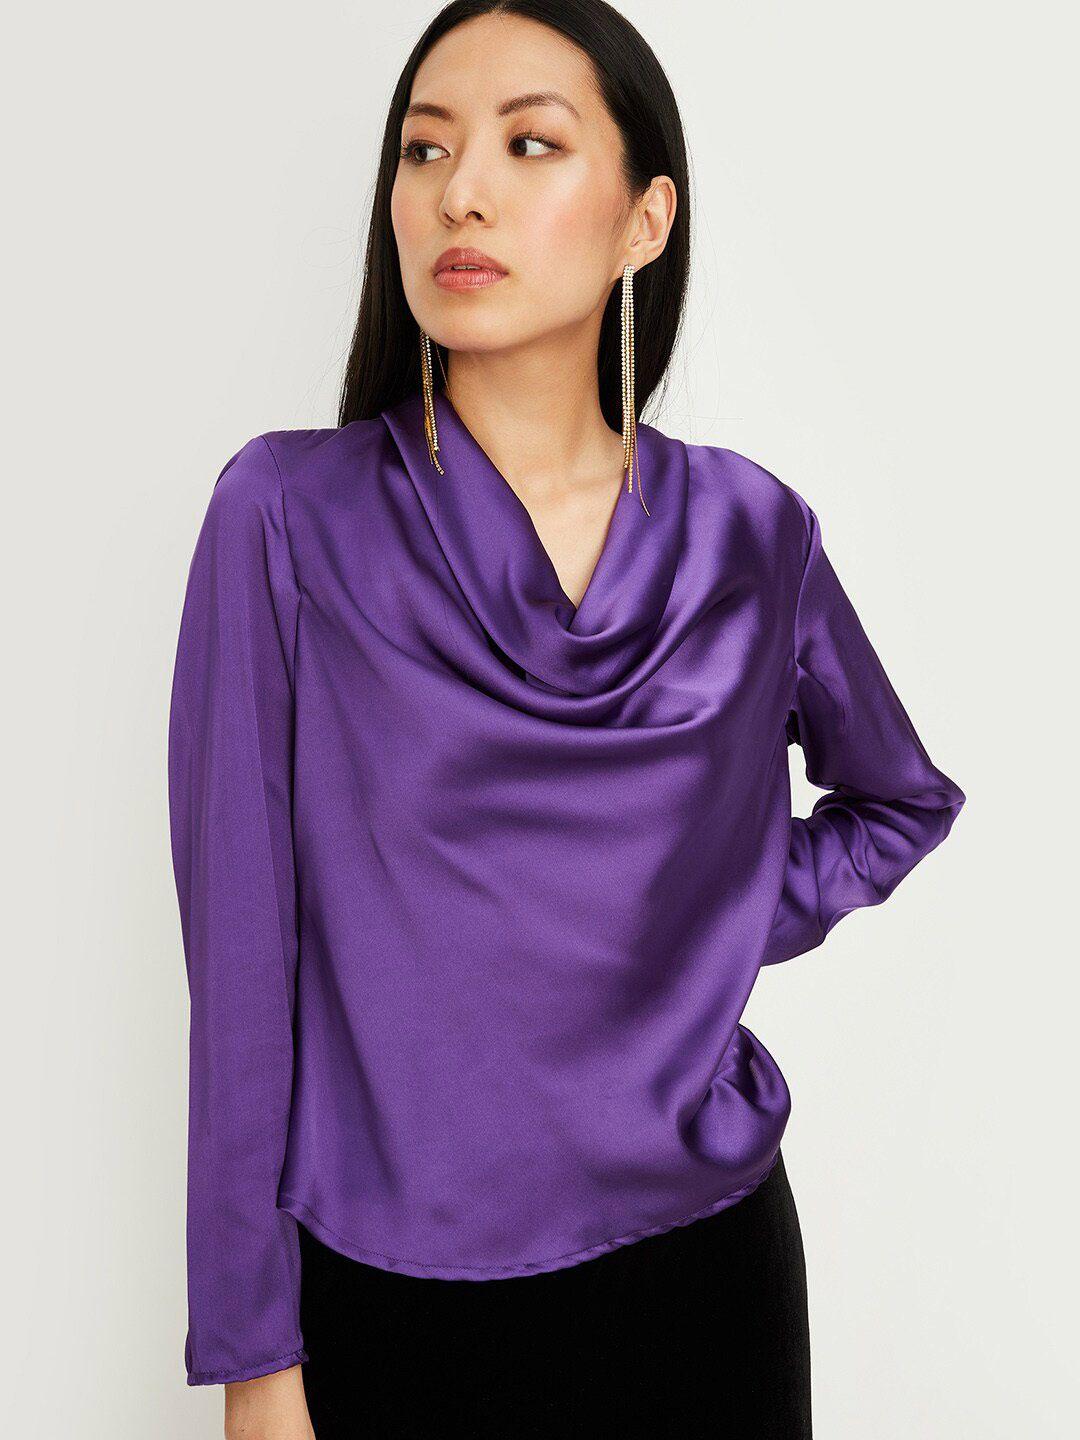 max cowl neck long sleeves top